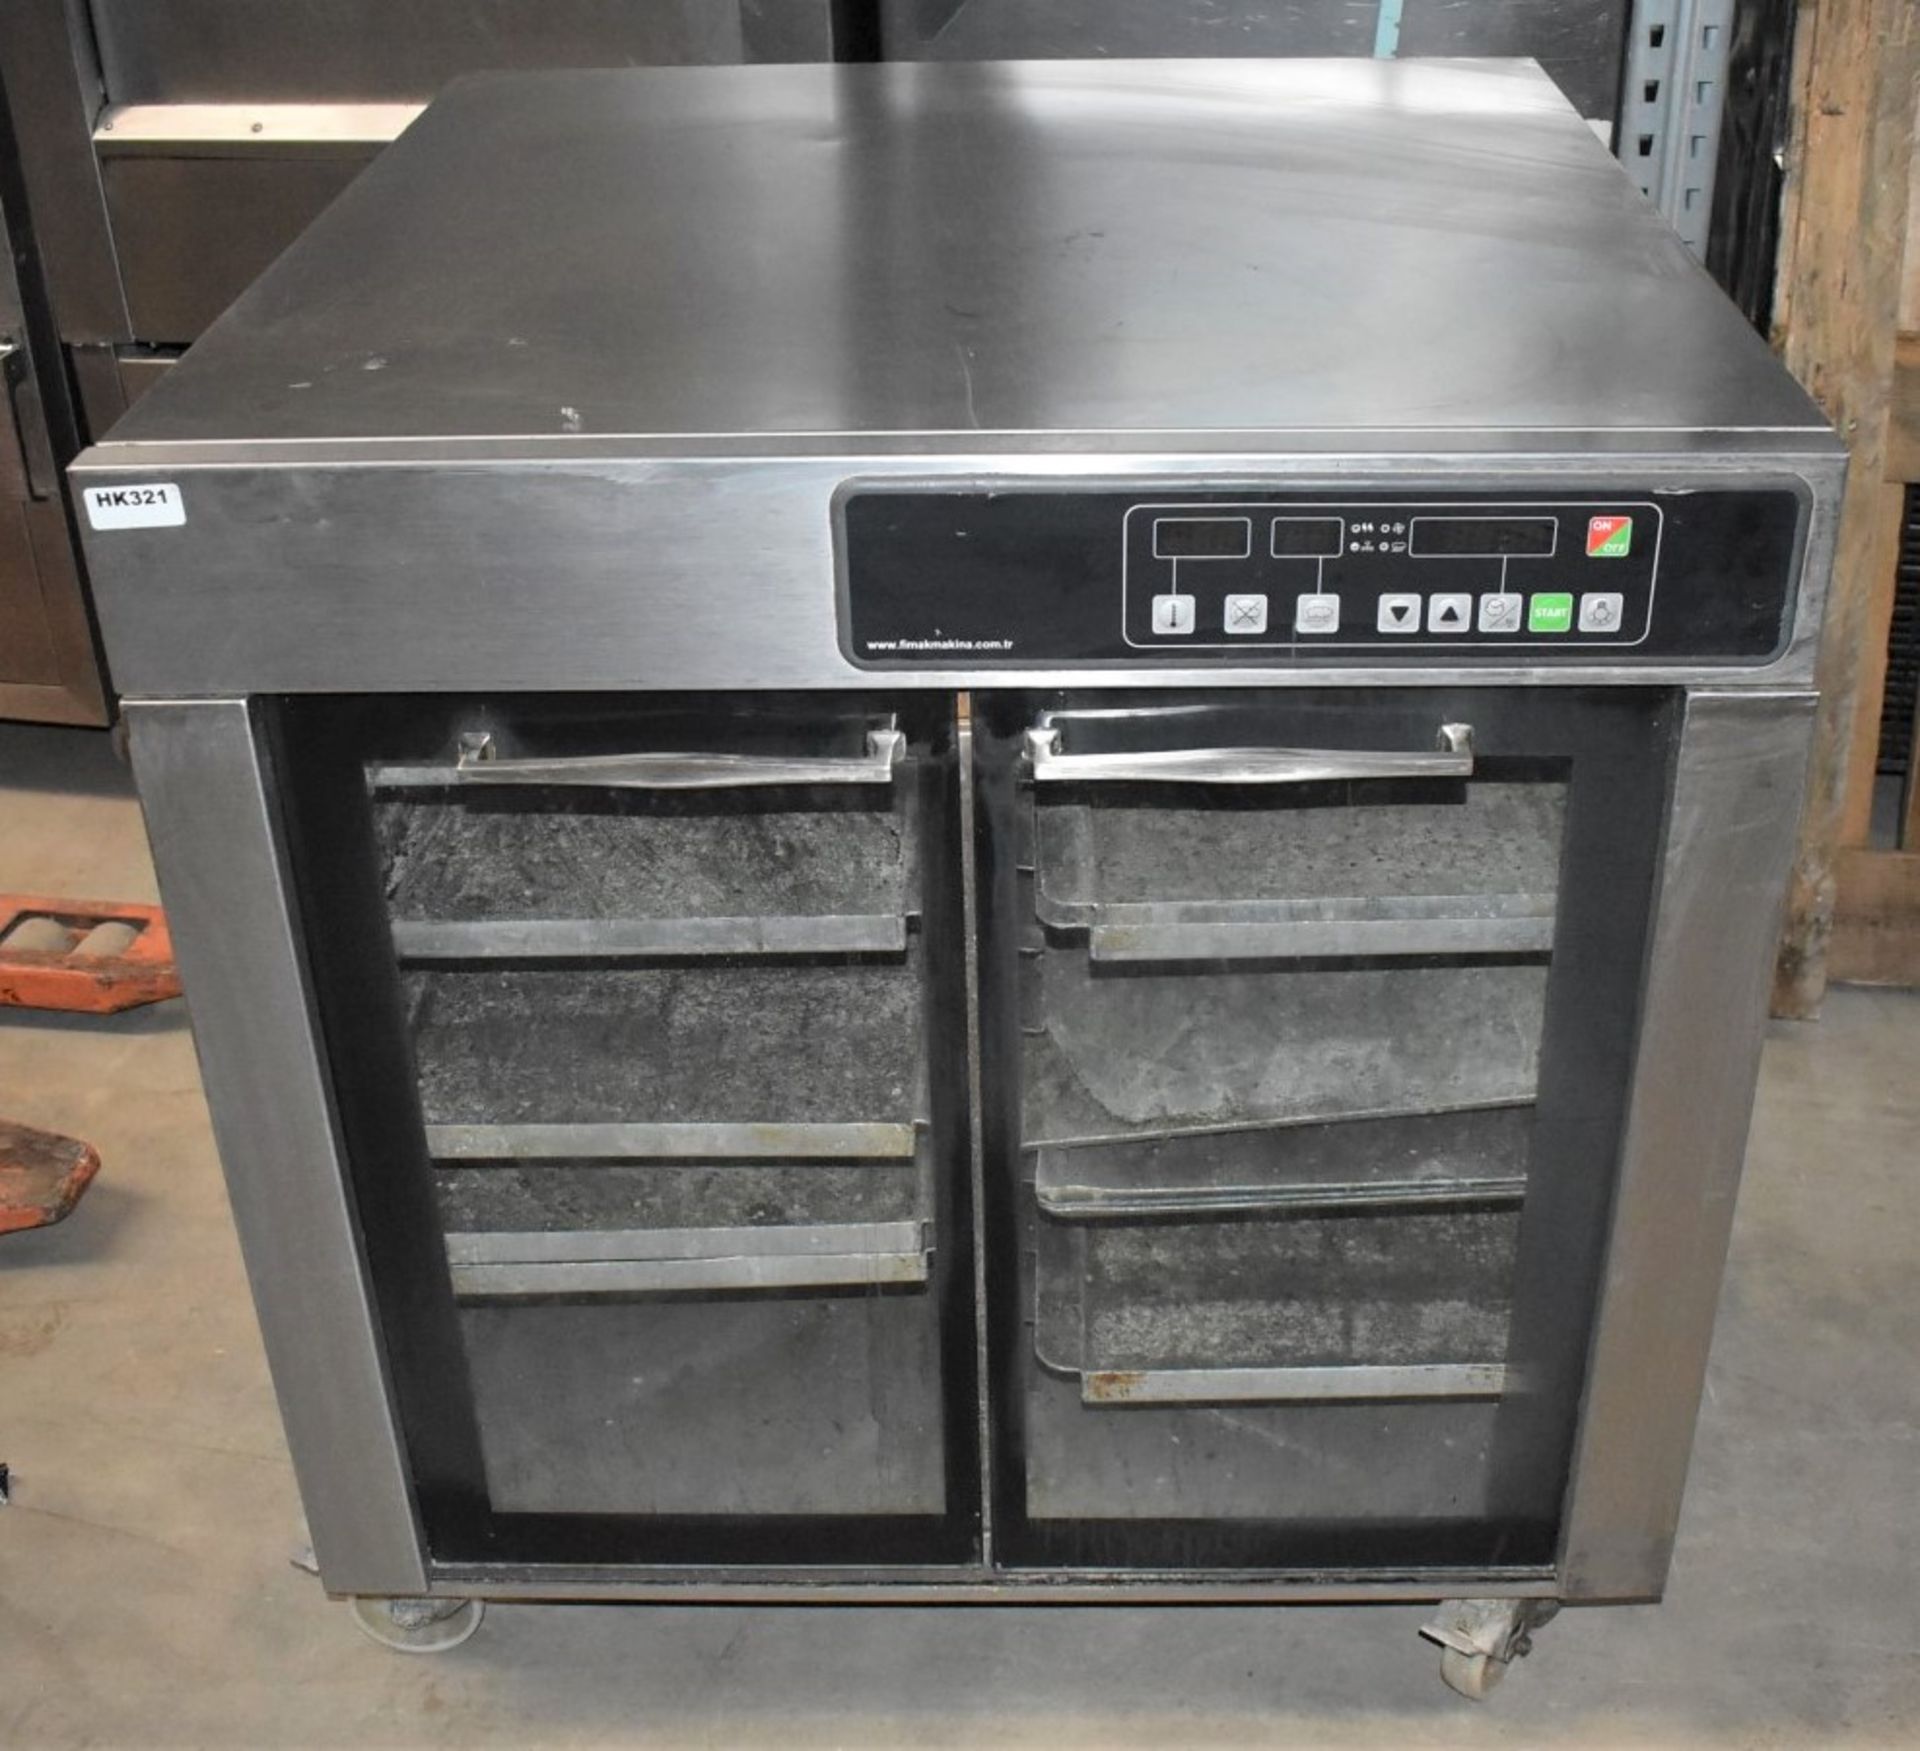 1 x FiMAK Windrose FW10 Convection Baking Oven - 240v - Size: 95 x 95 x 95 cms - Ref : HK321 WH2 B5G - Image 4 of 8